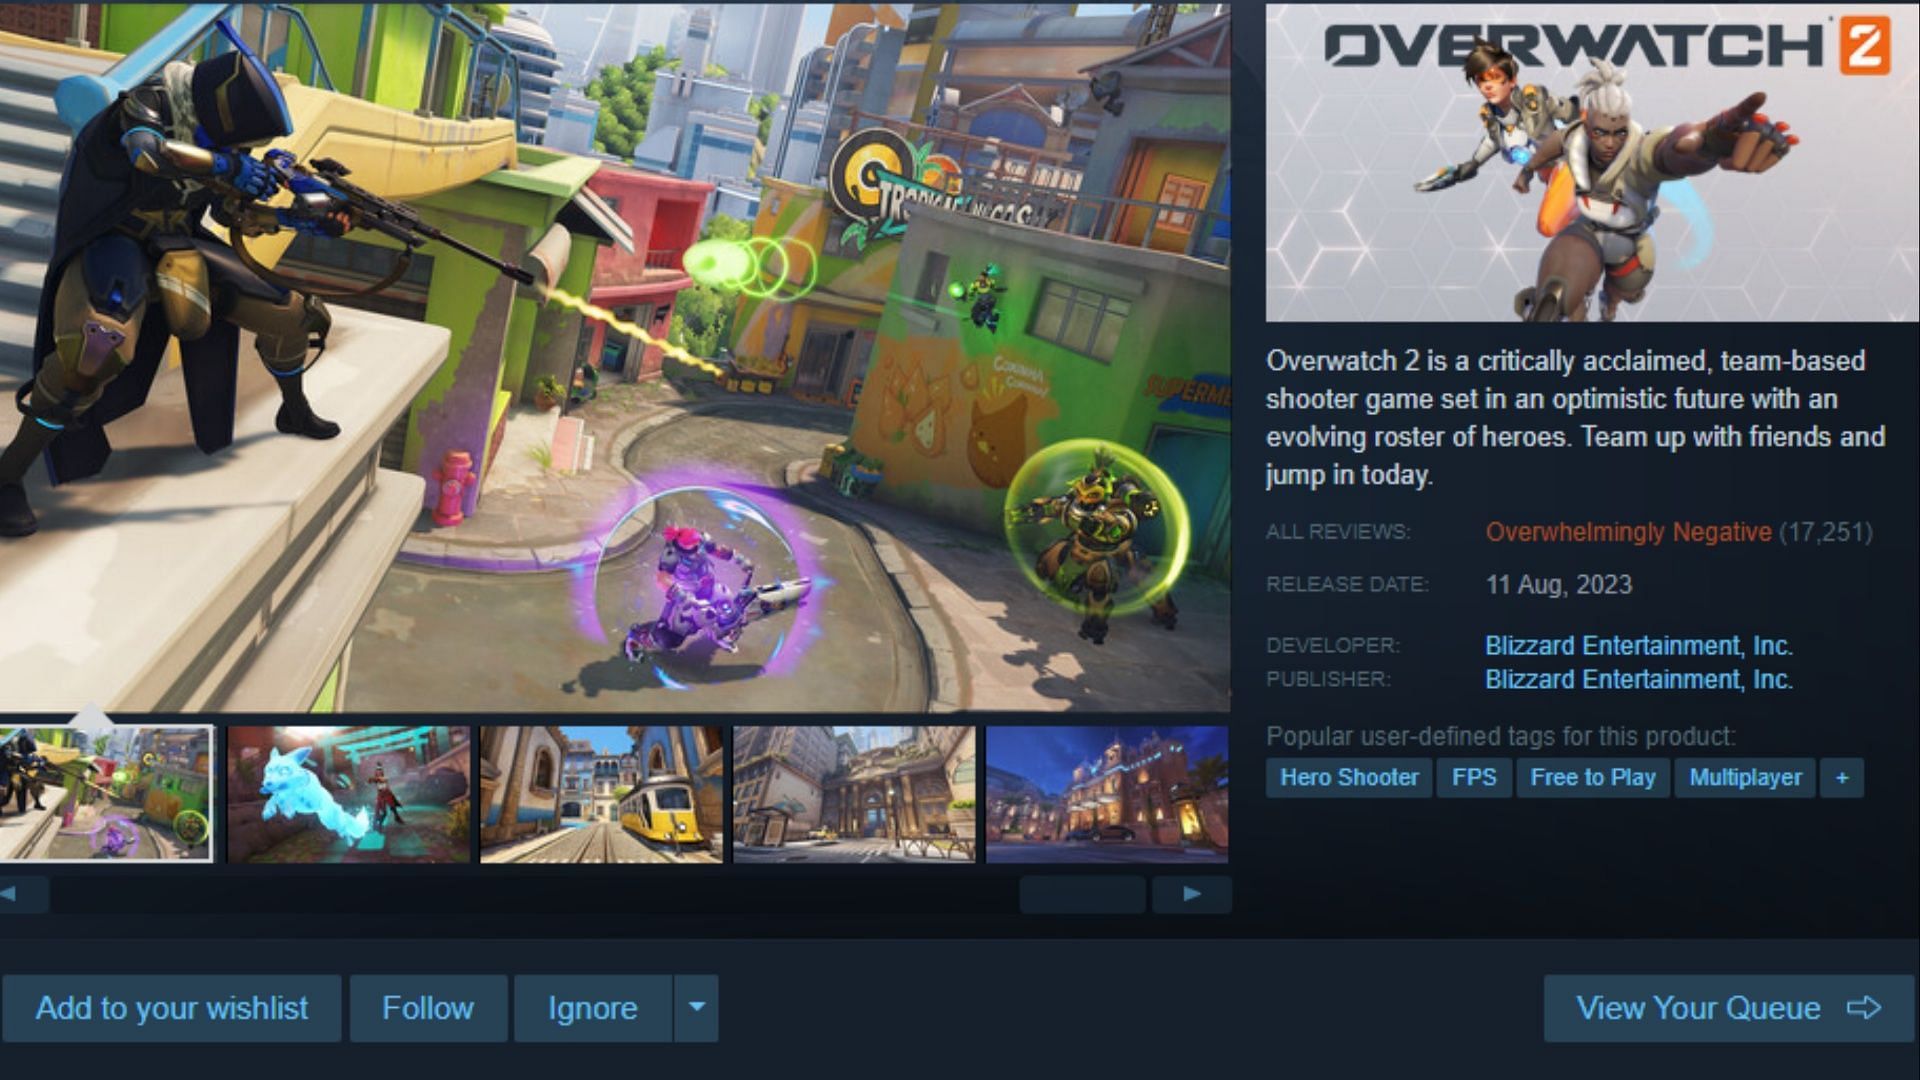 The Day Before launches to 'overwhelmingly negative' Steam reviews